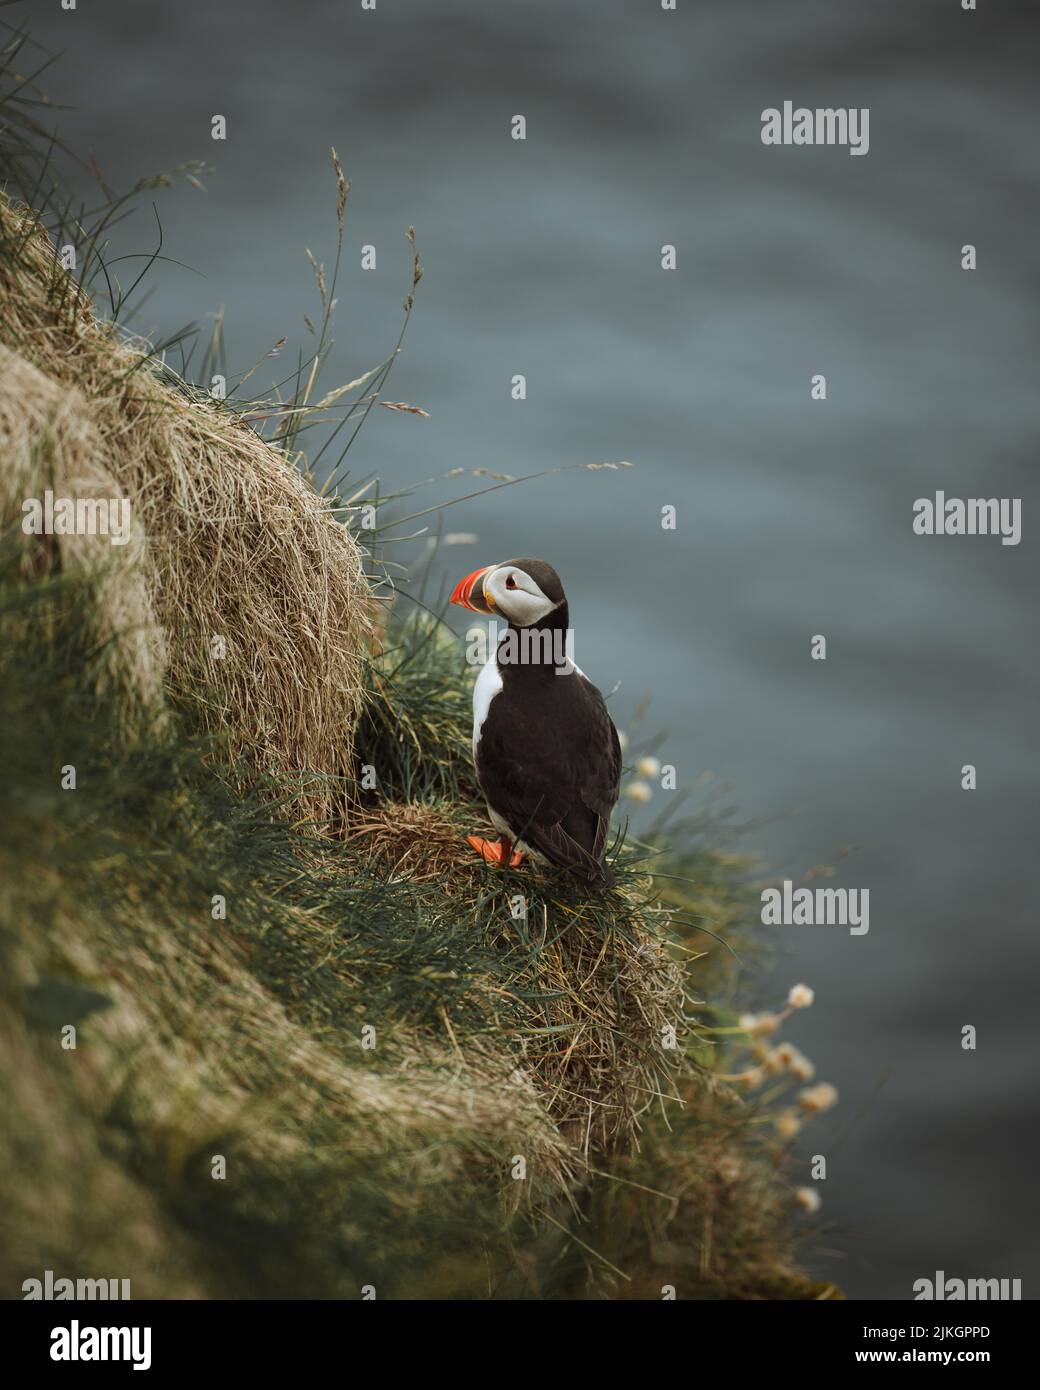 A vertical shot of an Atlantic puffin (Fratercula arctica) on a blurred background on Faroe islands Stock Photo